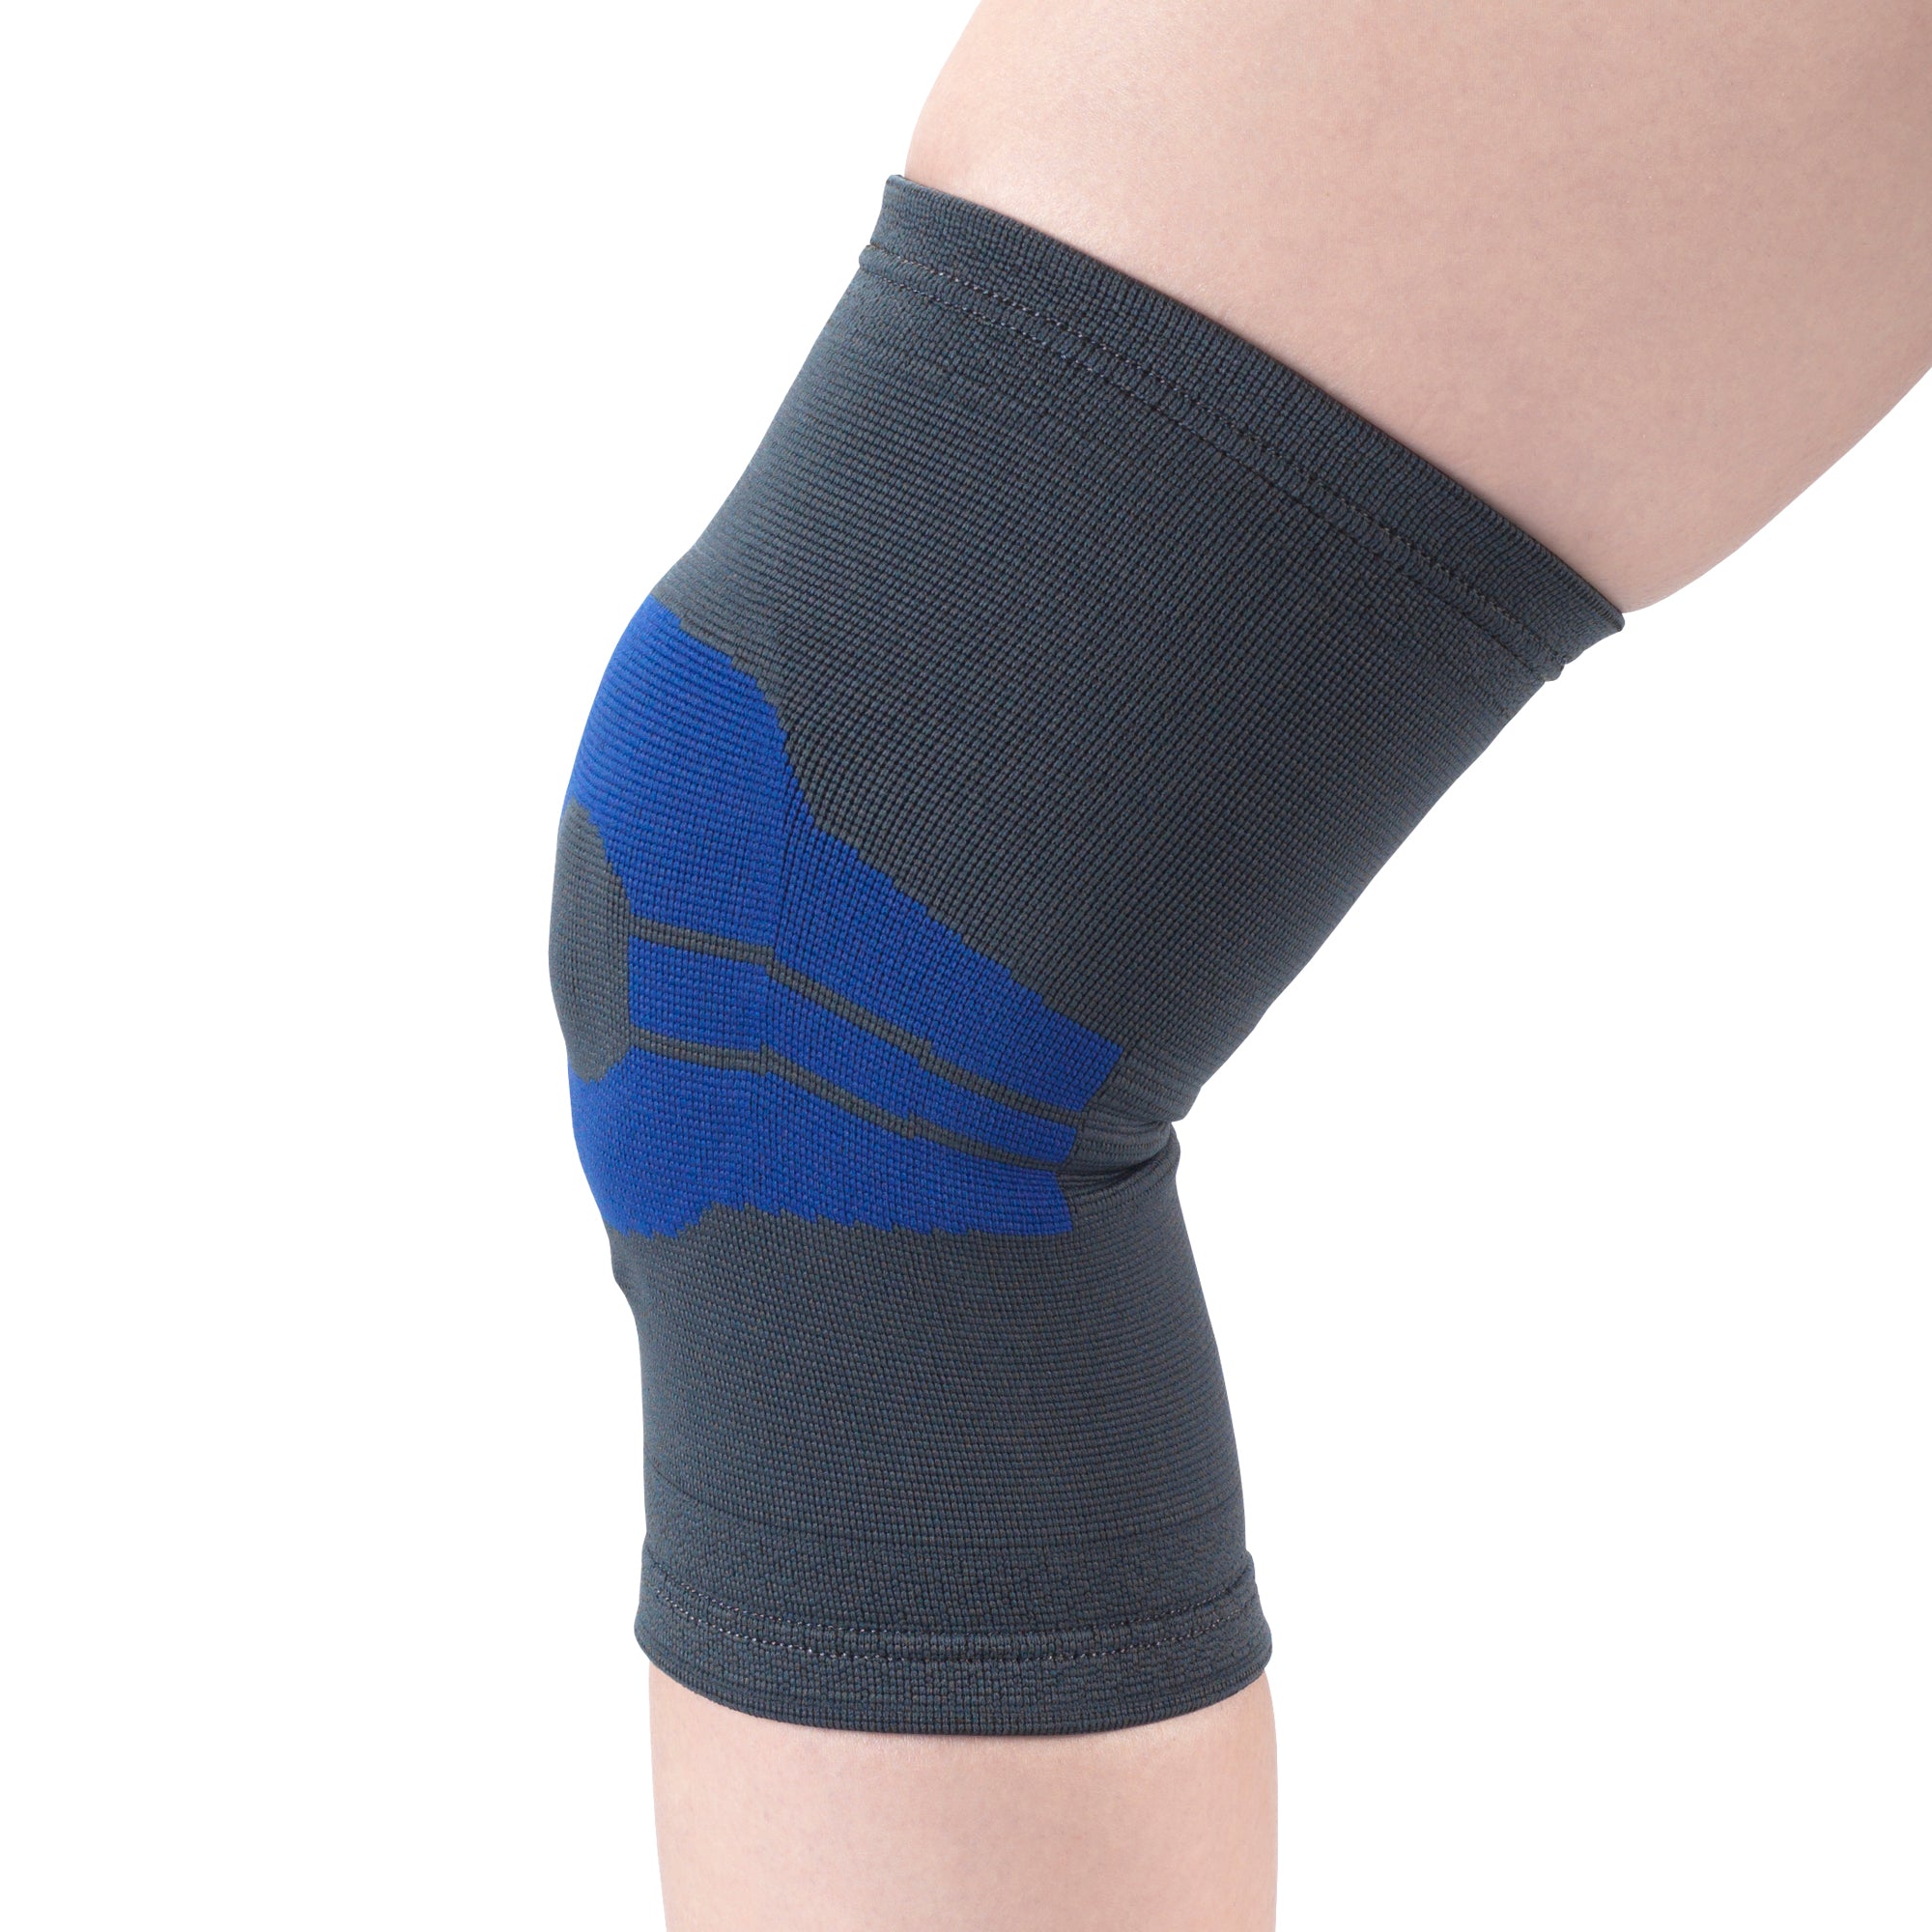 --Side of KNEE SUPPORT WITH COMPRESSION GEL INSERT--